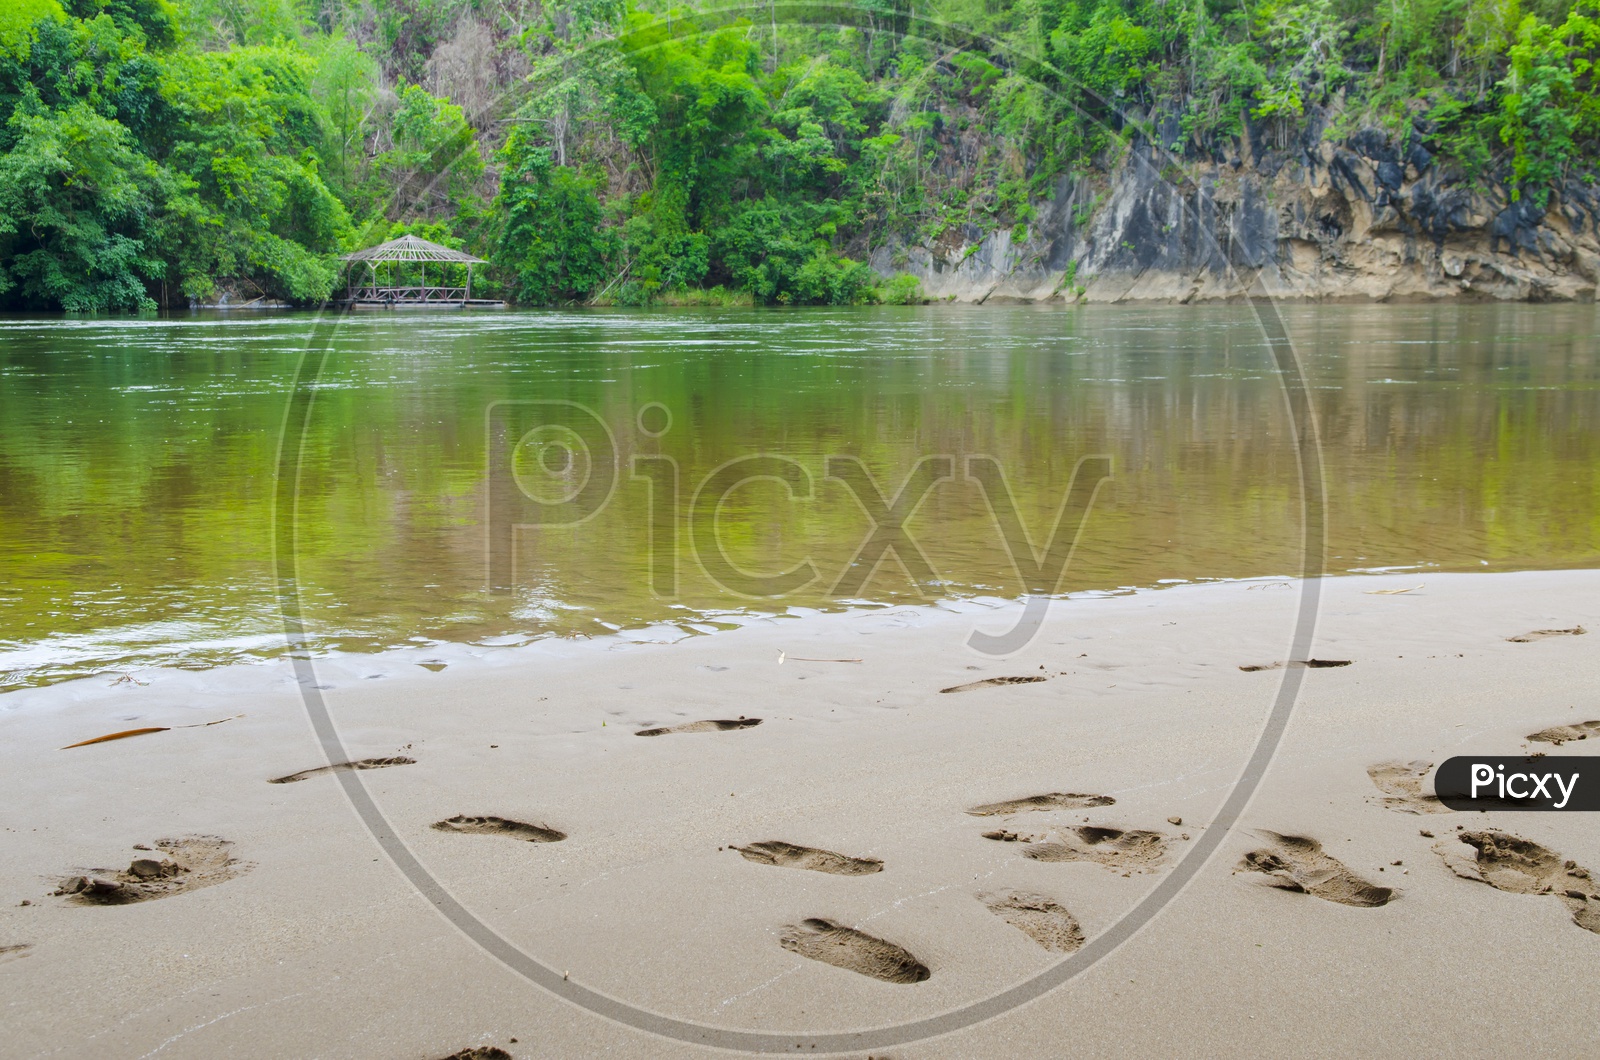 Footsteps alongside a Stream in the tropical forest.